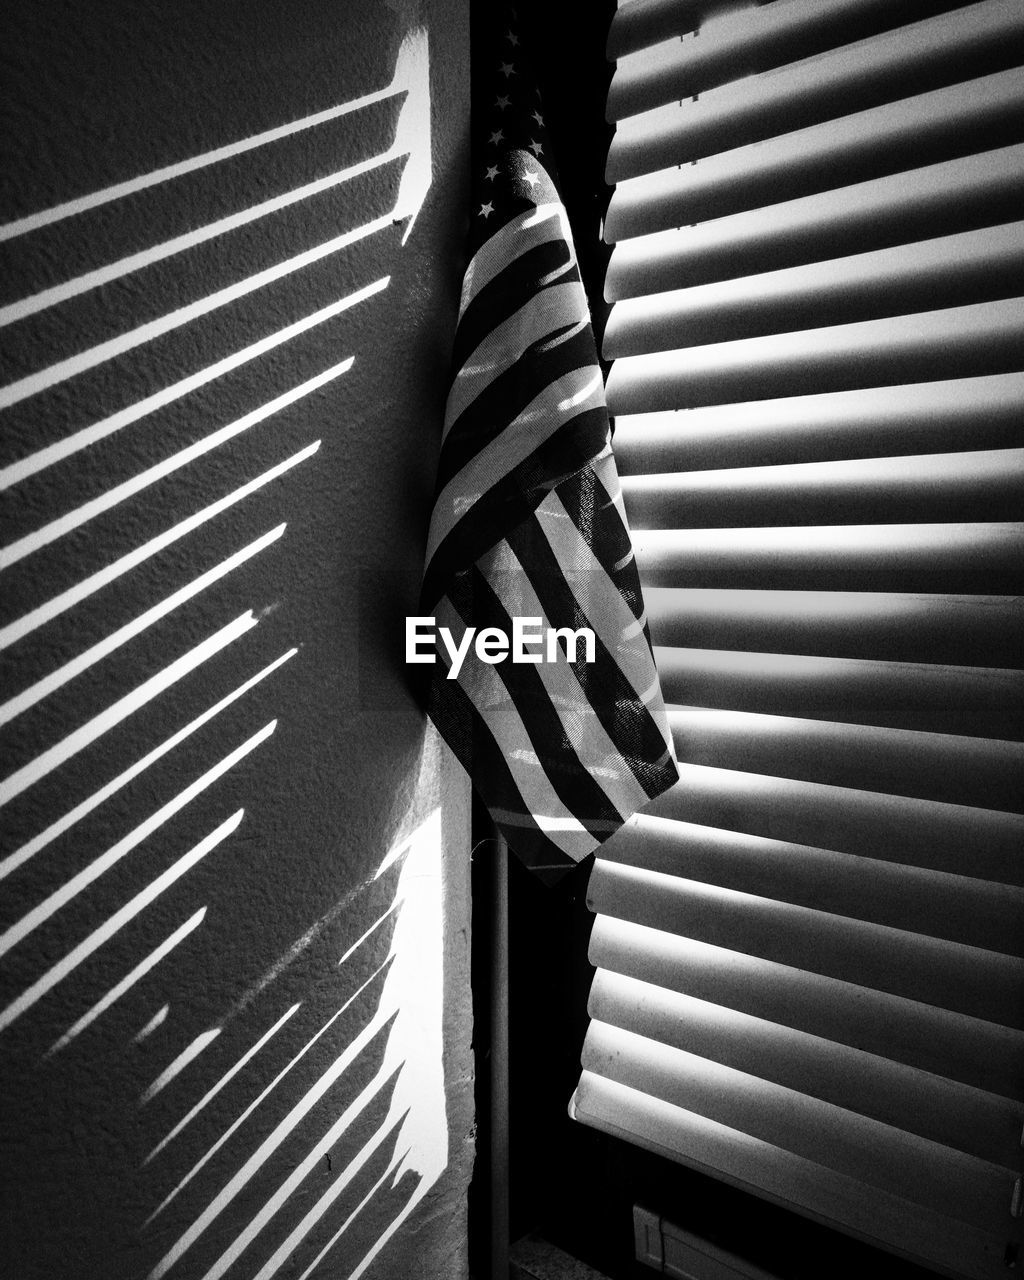 American flag by window blinds, shadows, monochrome image